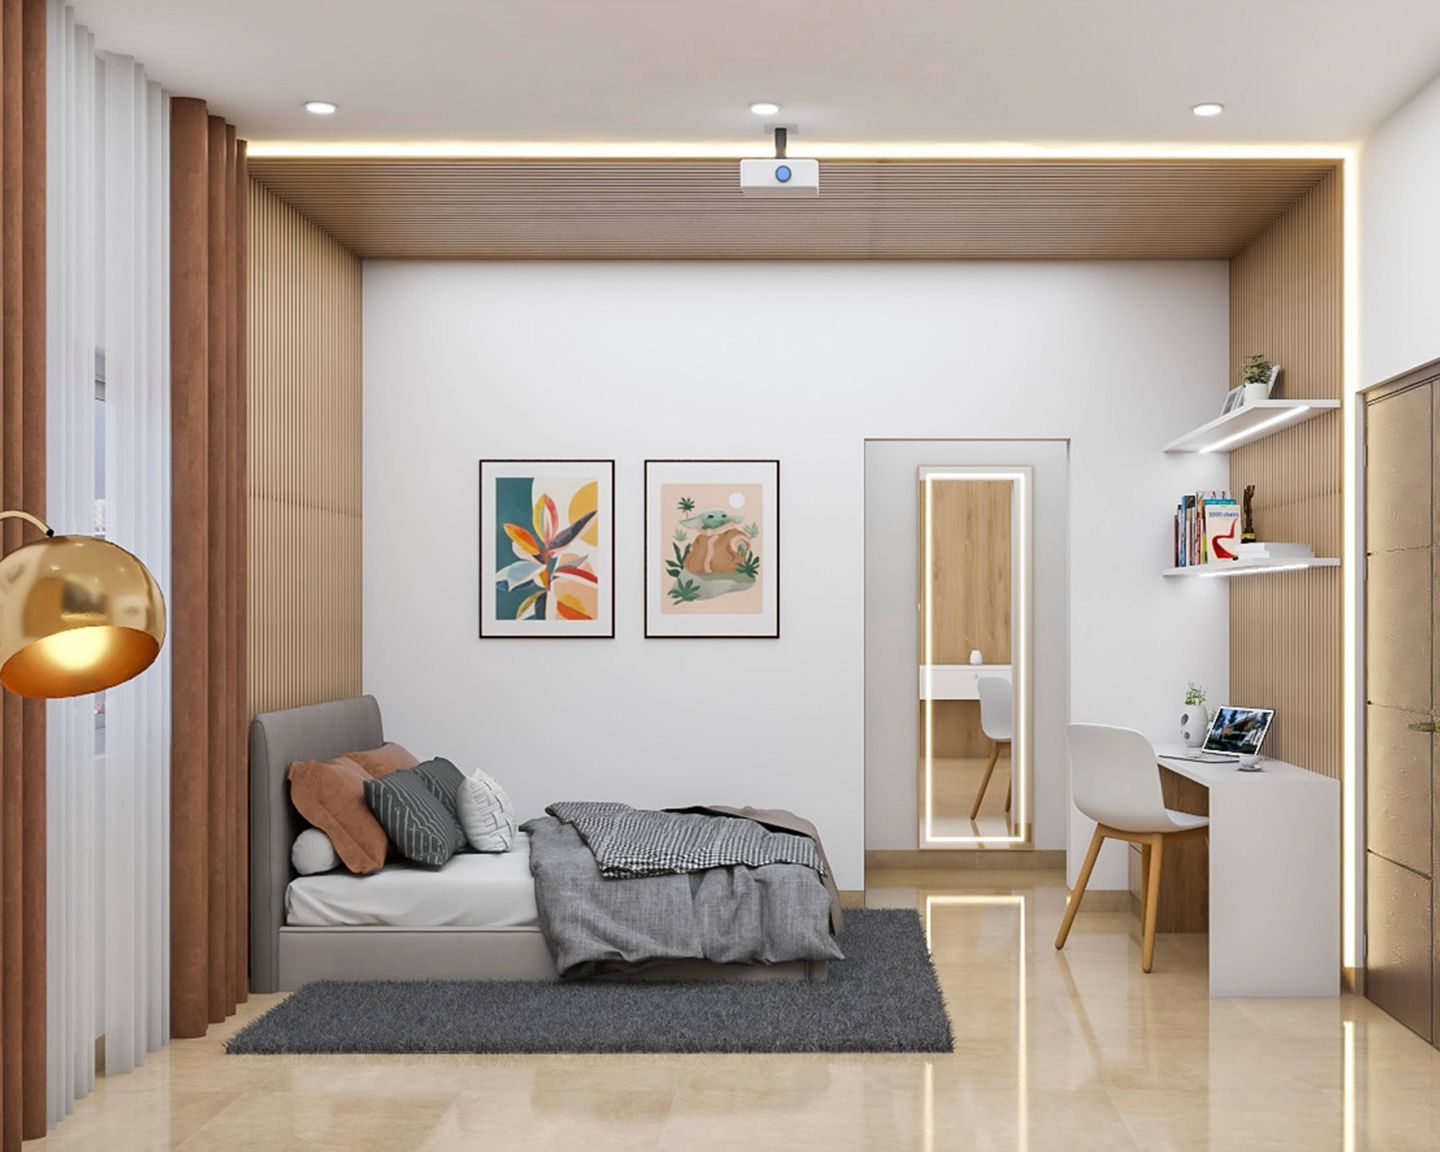 Modern Style Kid's Bedroom Design With Wooden Panels